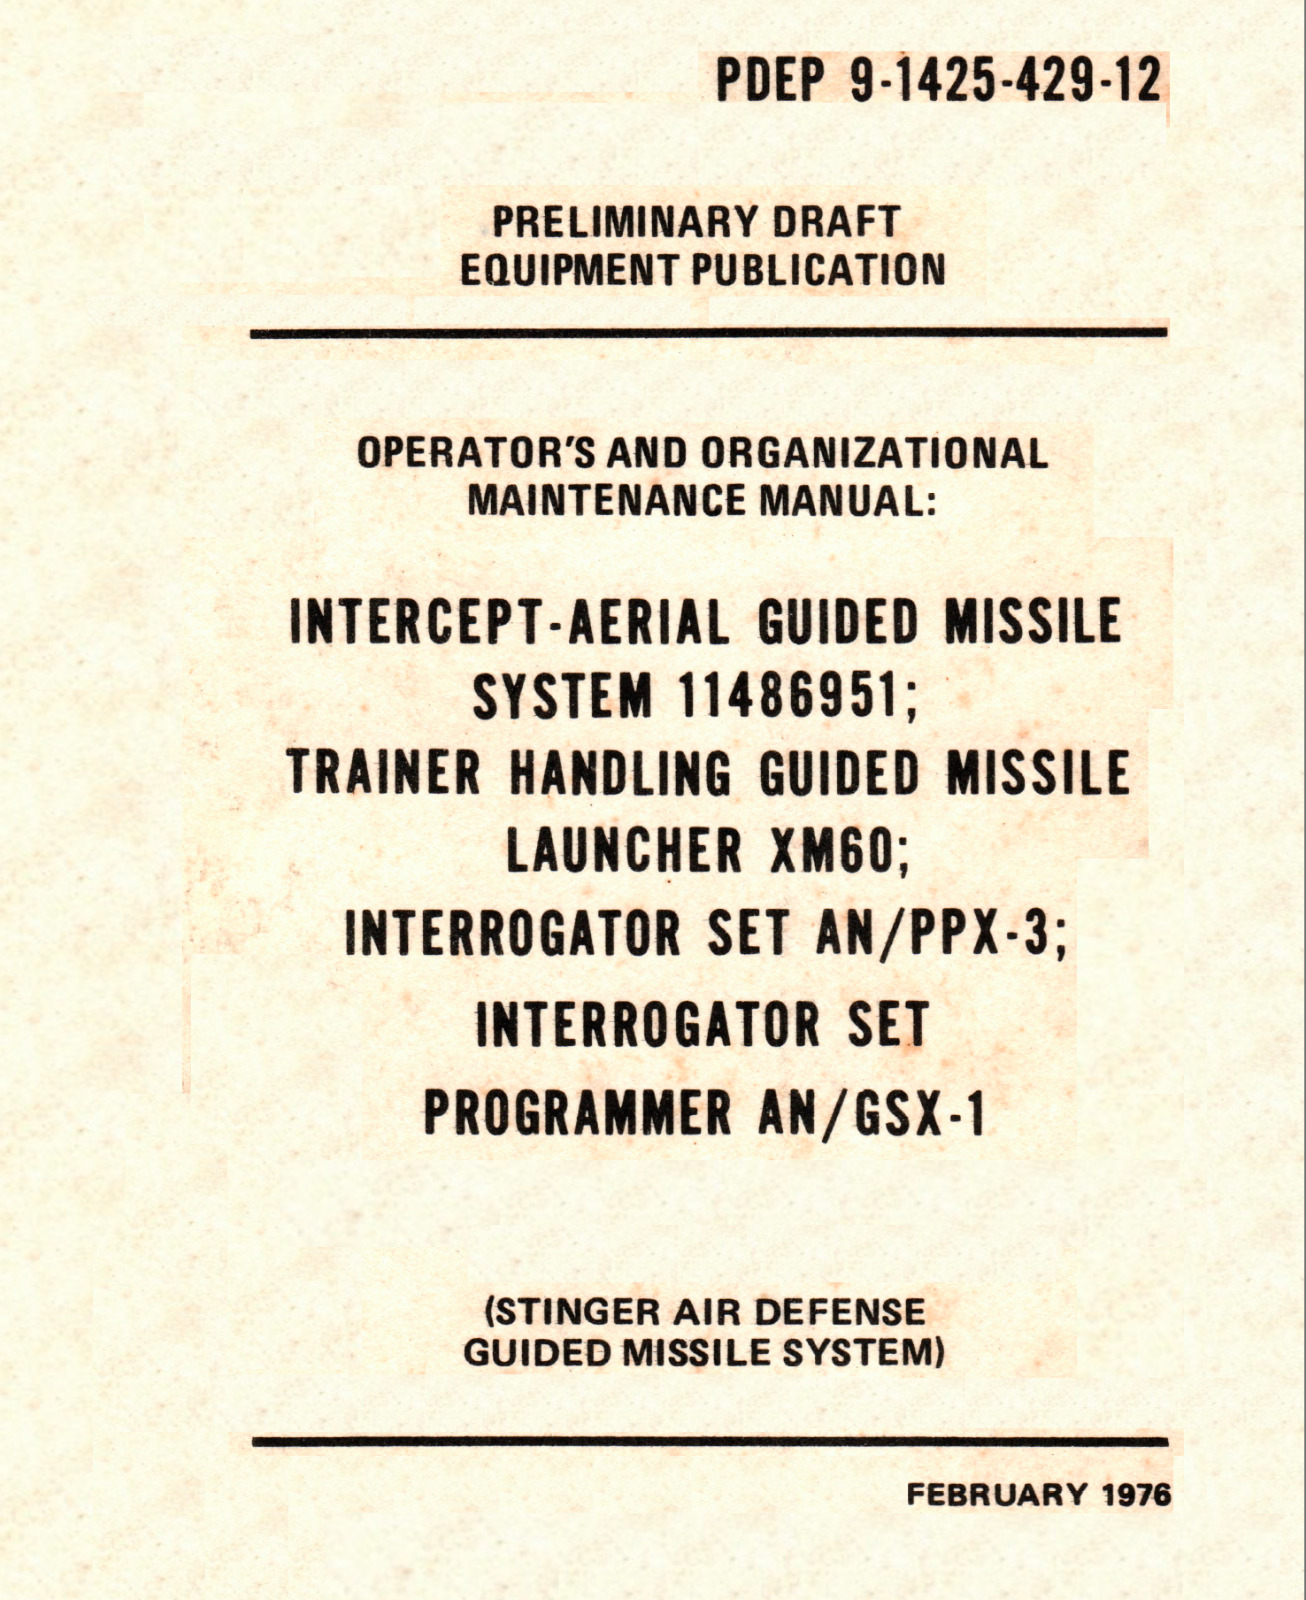 164 Page 1976 STINGER TRAINER XM60 AN/PPX-3 AN/GSX-1 IFF Missile Pub on Data CD